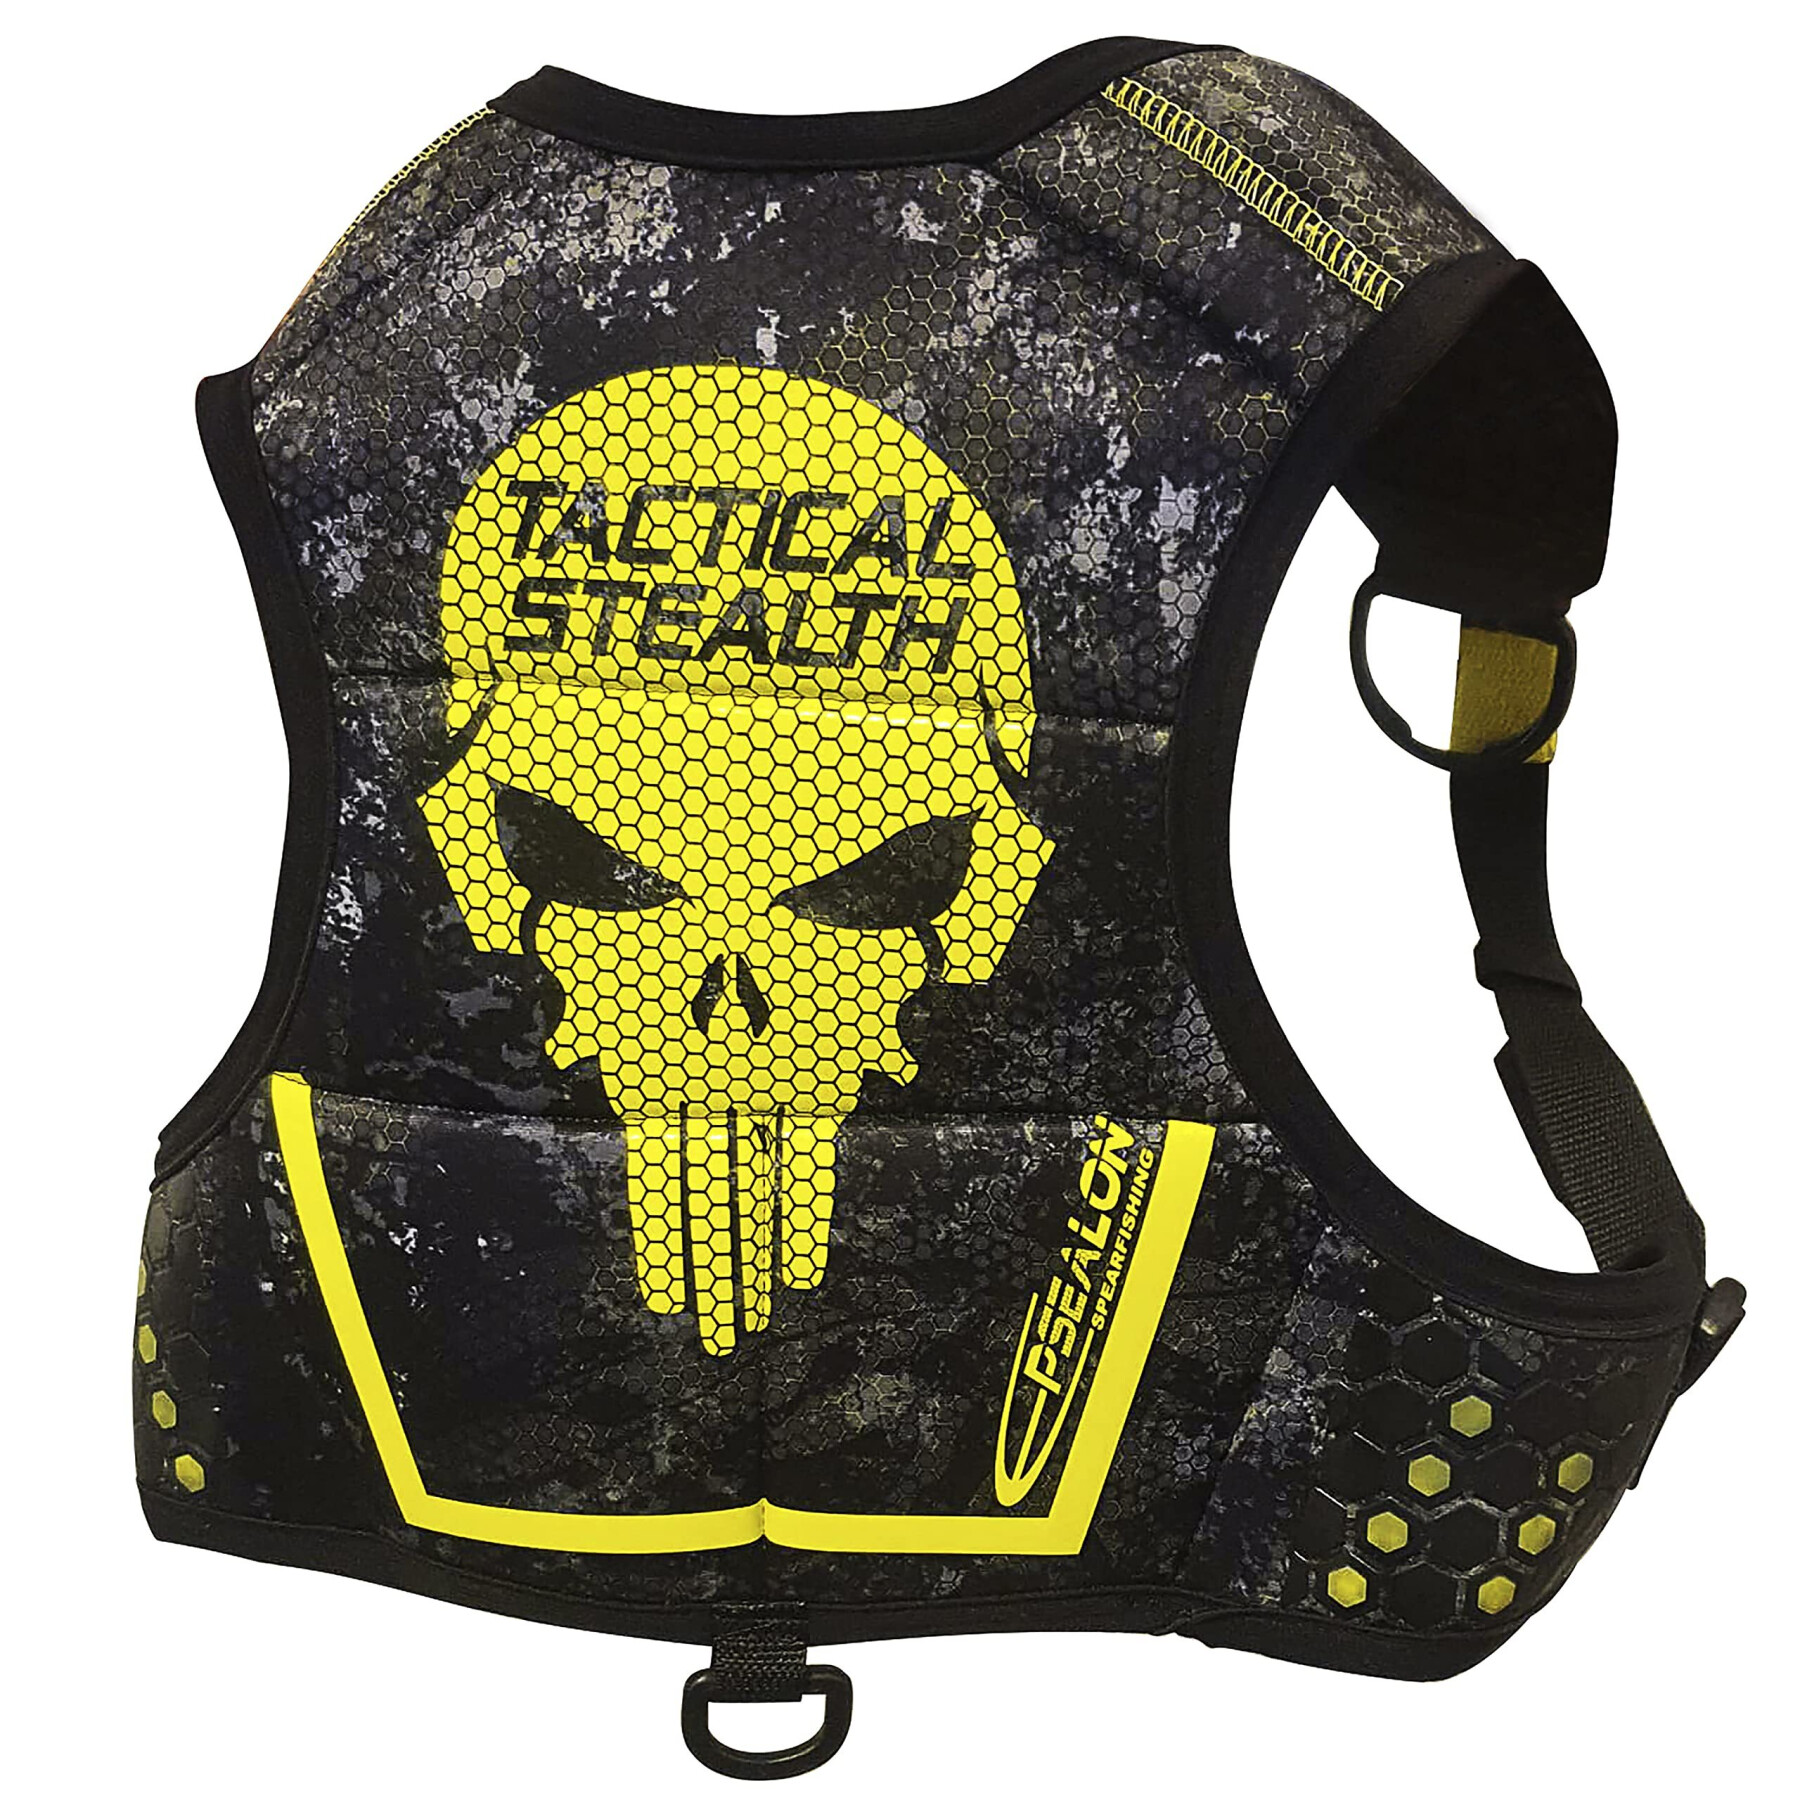 Diving harness Epsealon Tactical Stealth